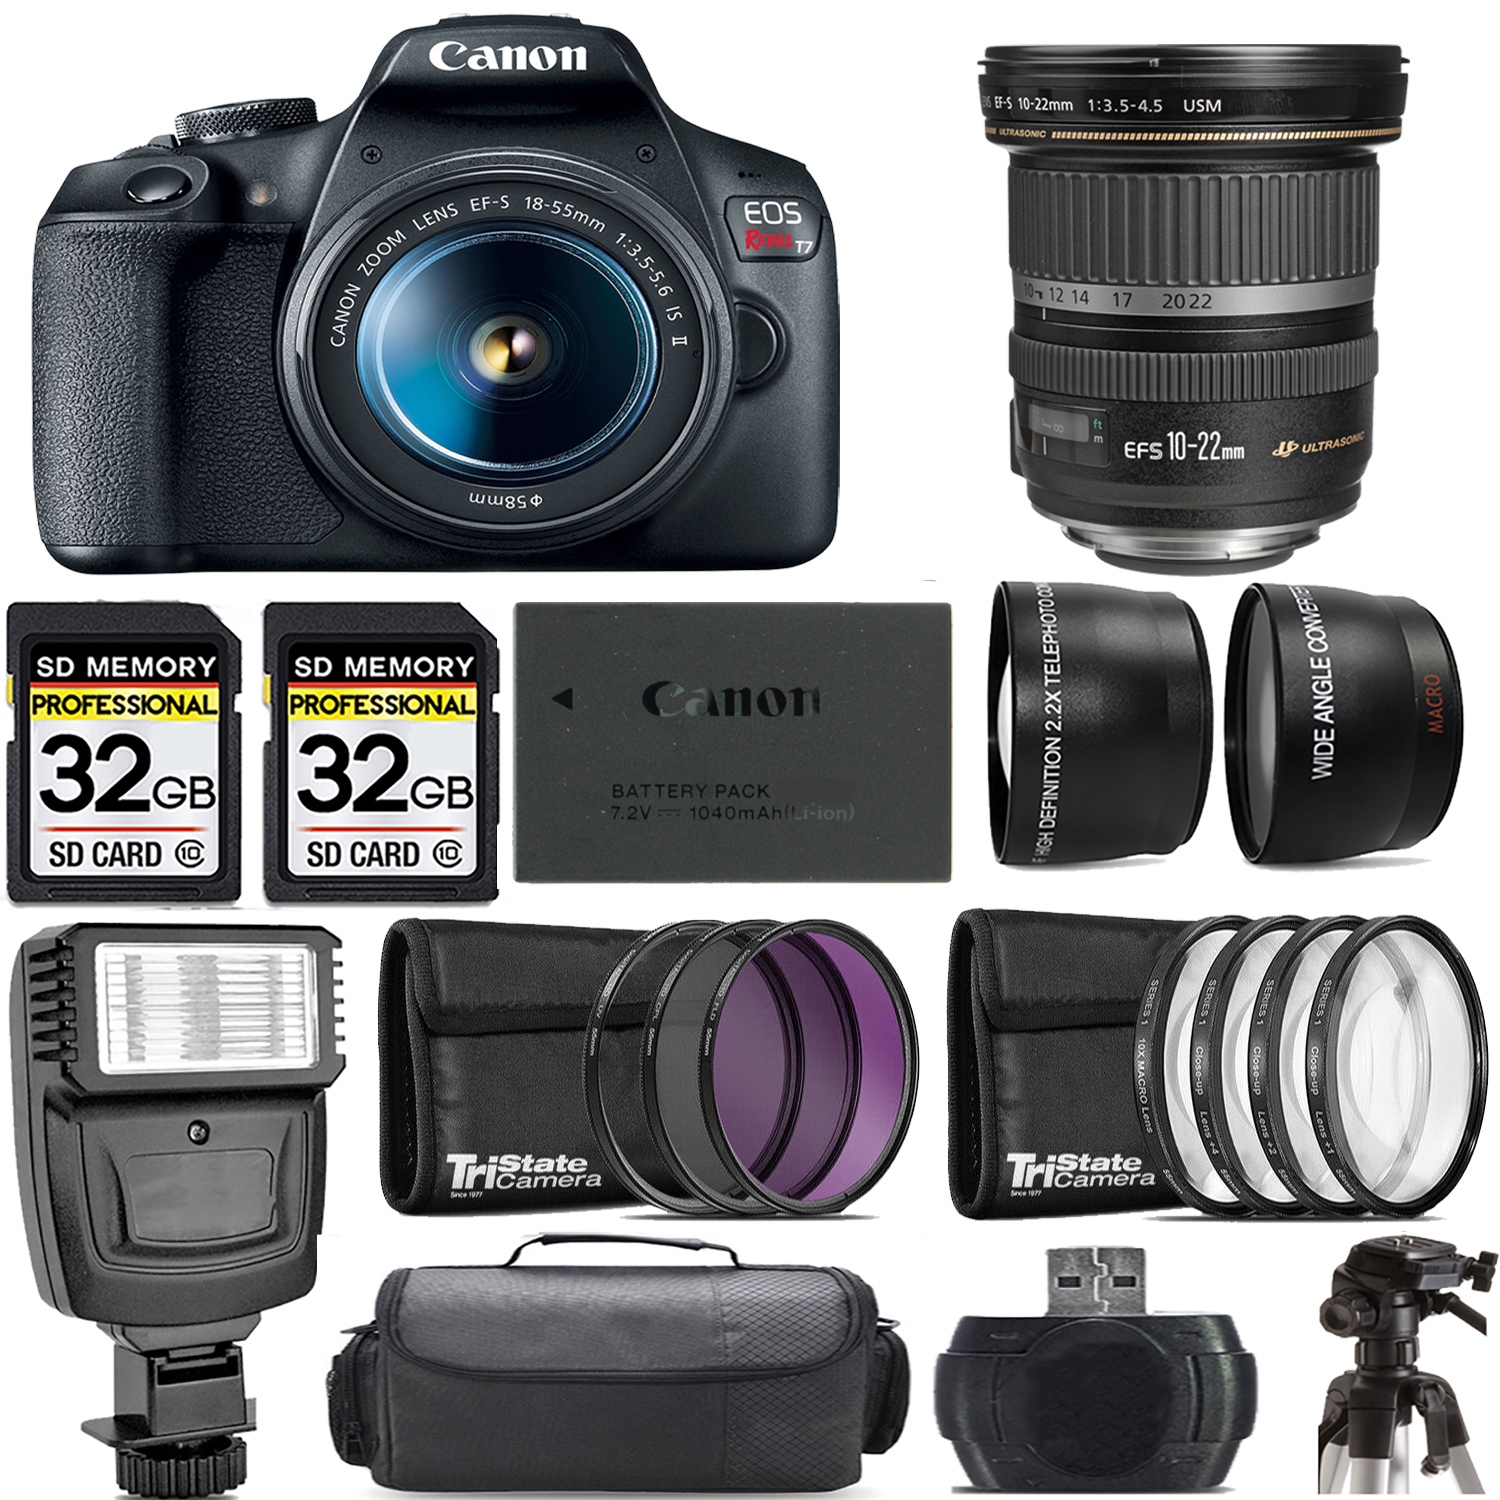 EOS Rebel T7 with 18-55mm Lens + 10-22mm f/3.5- 4.5 USM Lens + Flash - Kit *FREE SHIPPING*